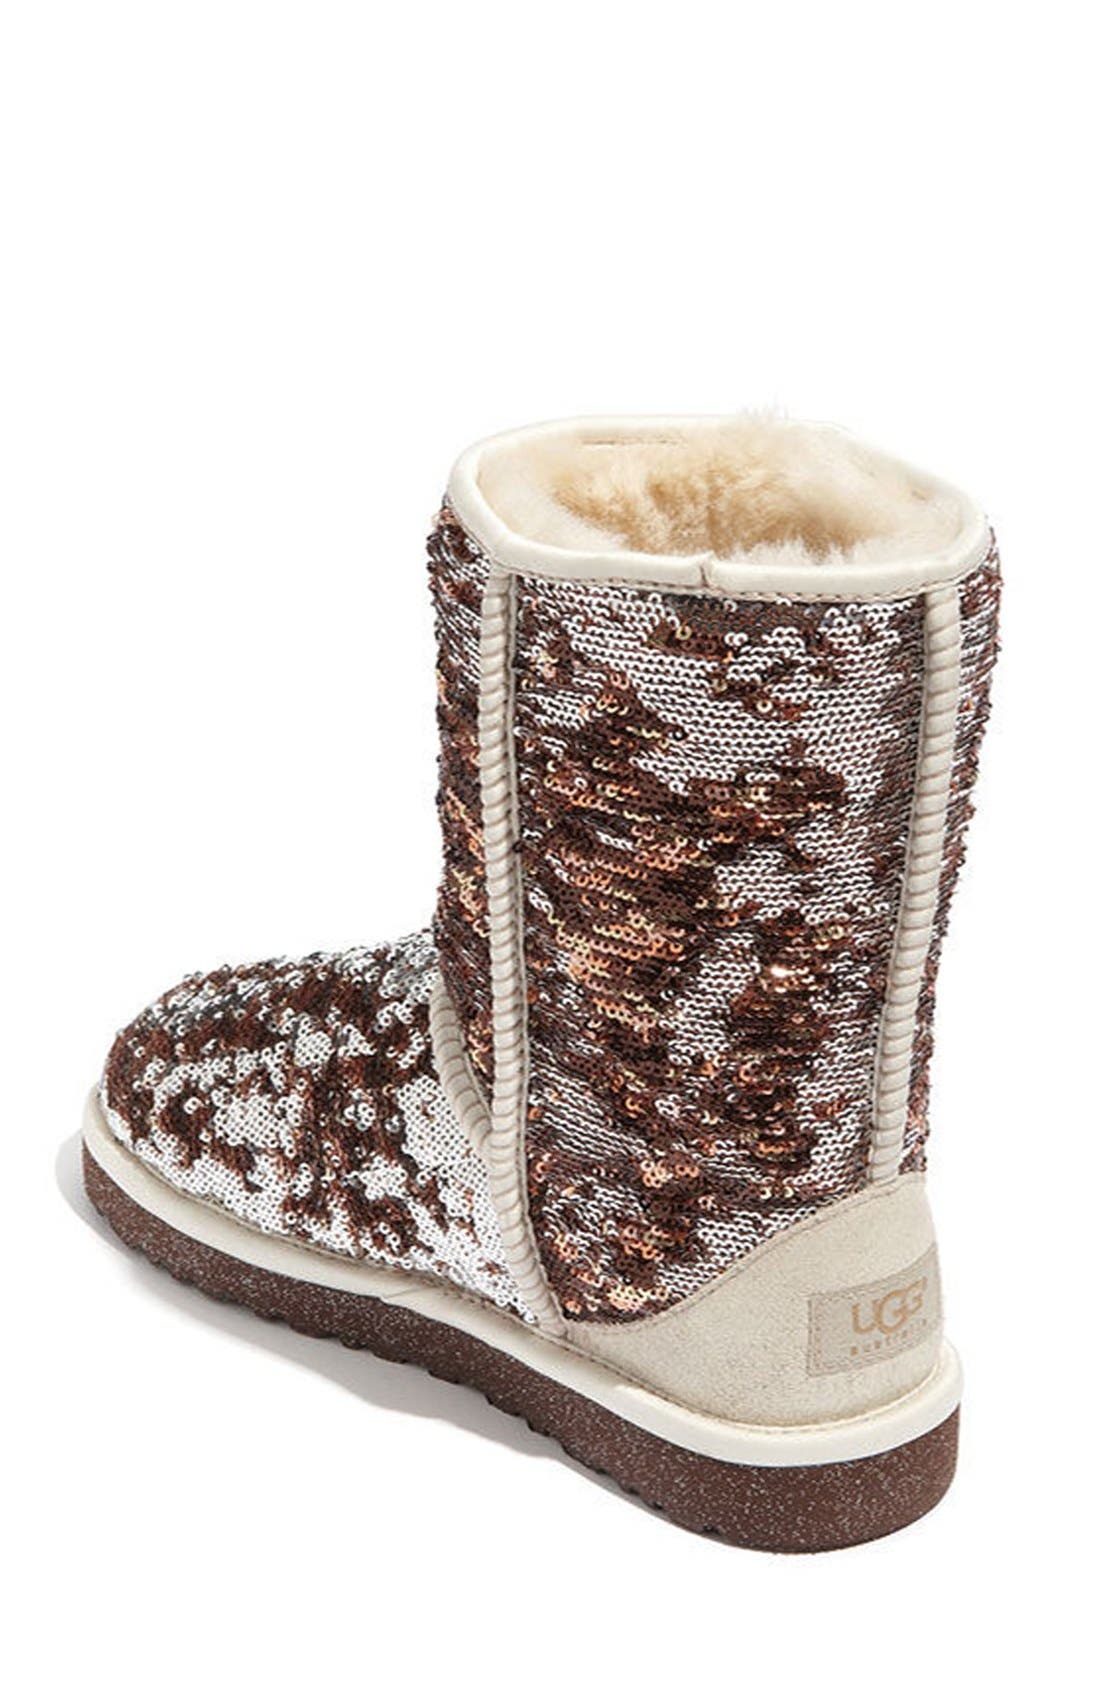 sparkle ugg boots